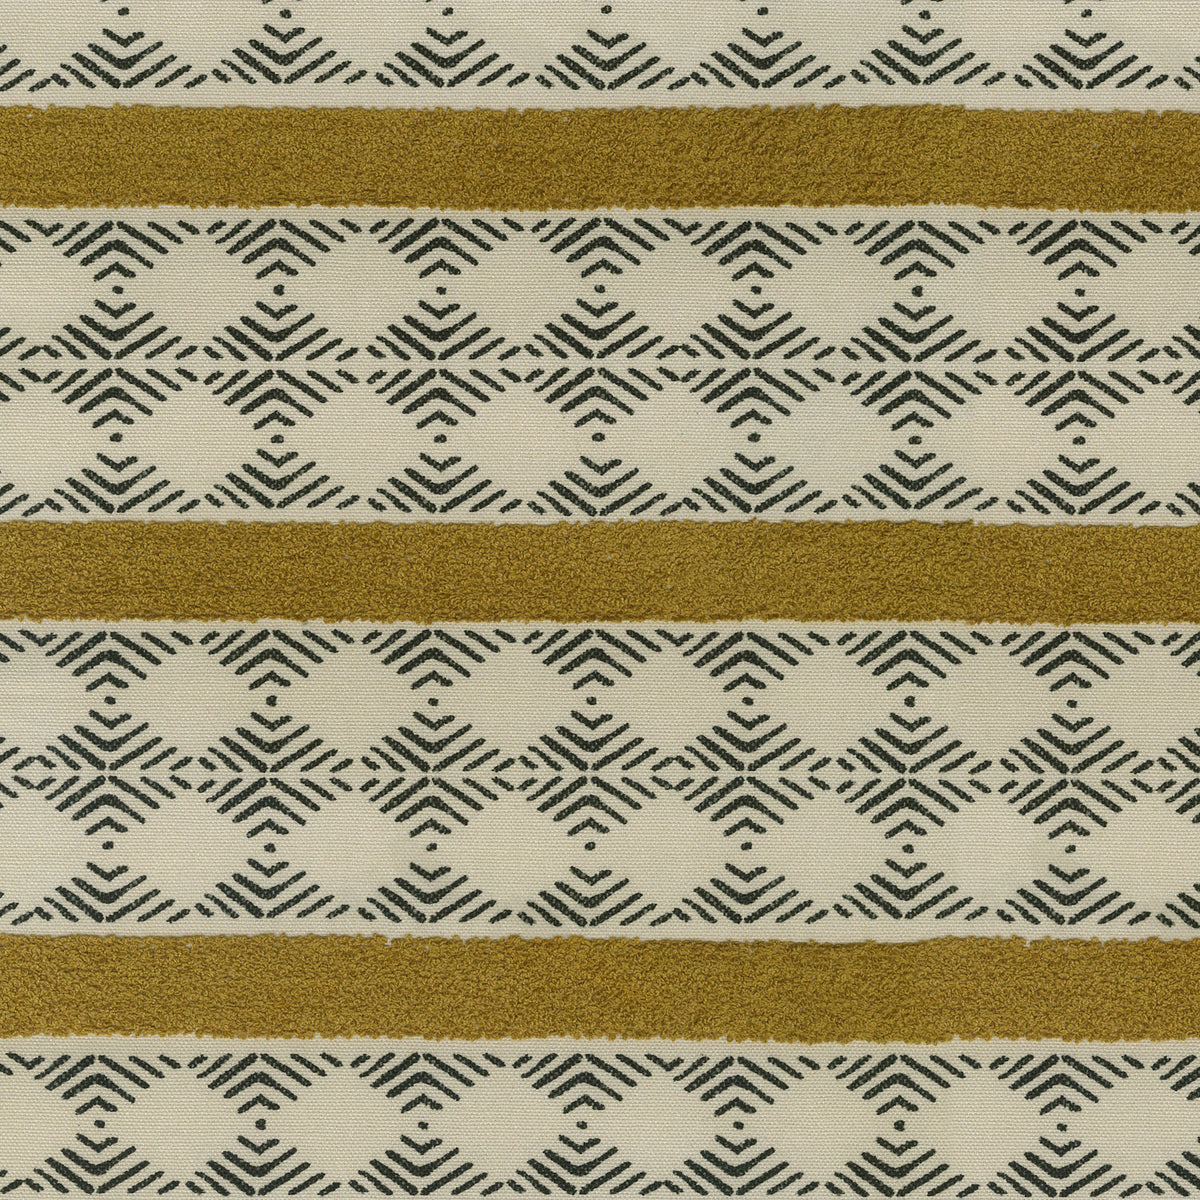 P/K Lifestyles Stitched Patch - Oro 410130 Fabric Swatch